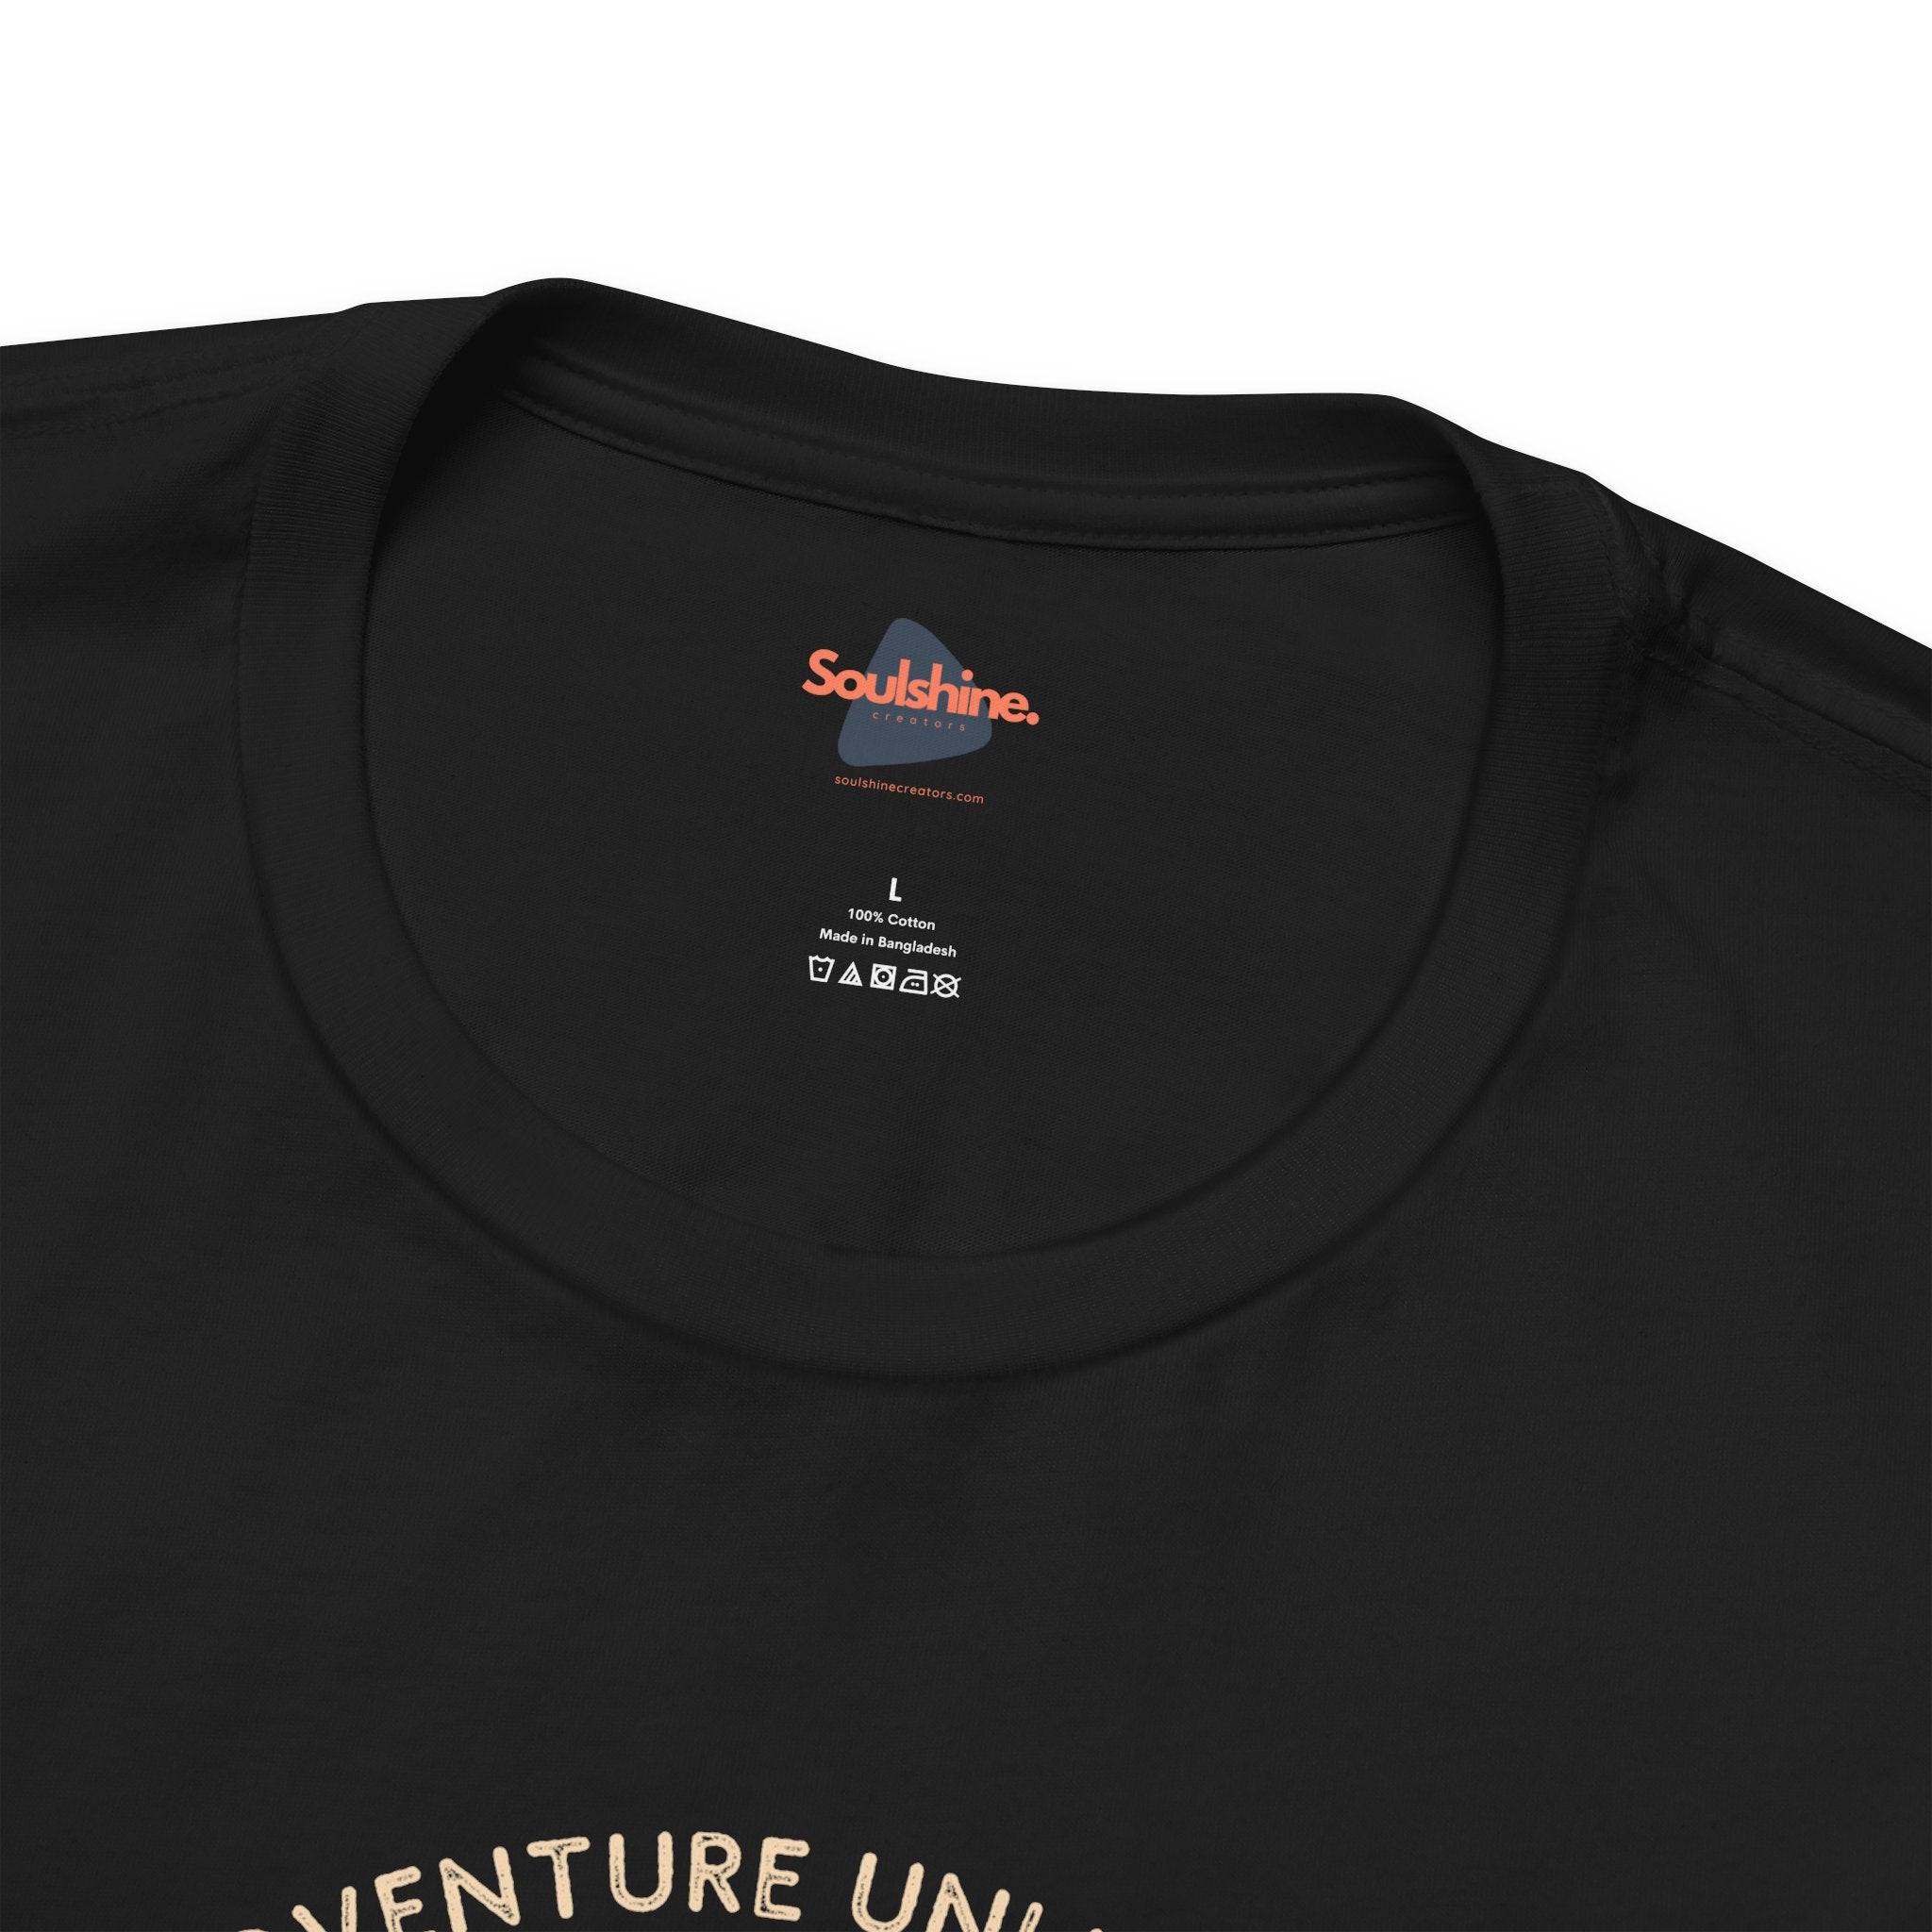 Adventure Unlimited - Unisex Jersey Short Sleeve Tee - Back of Black T-Shirt with Printed Design